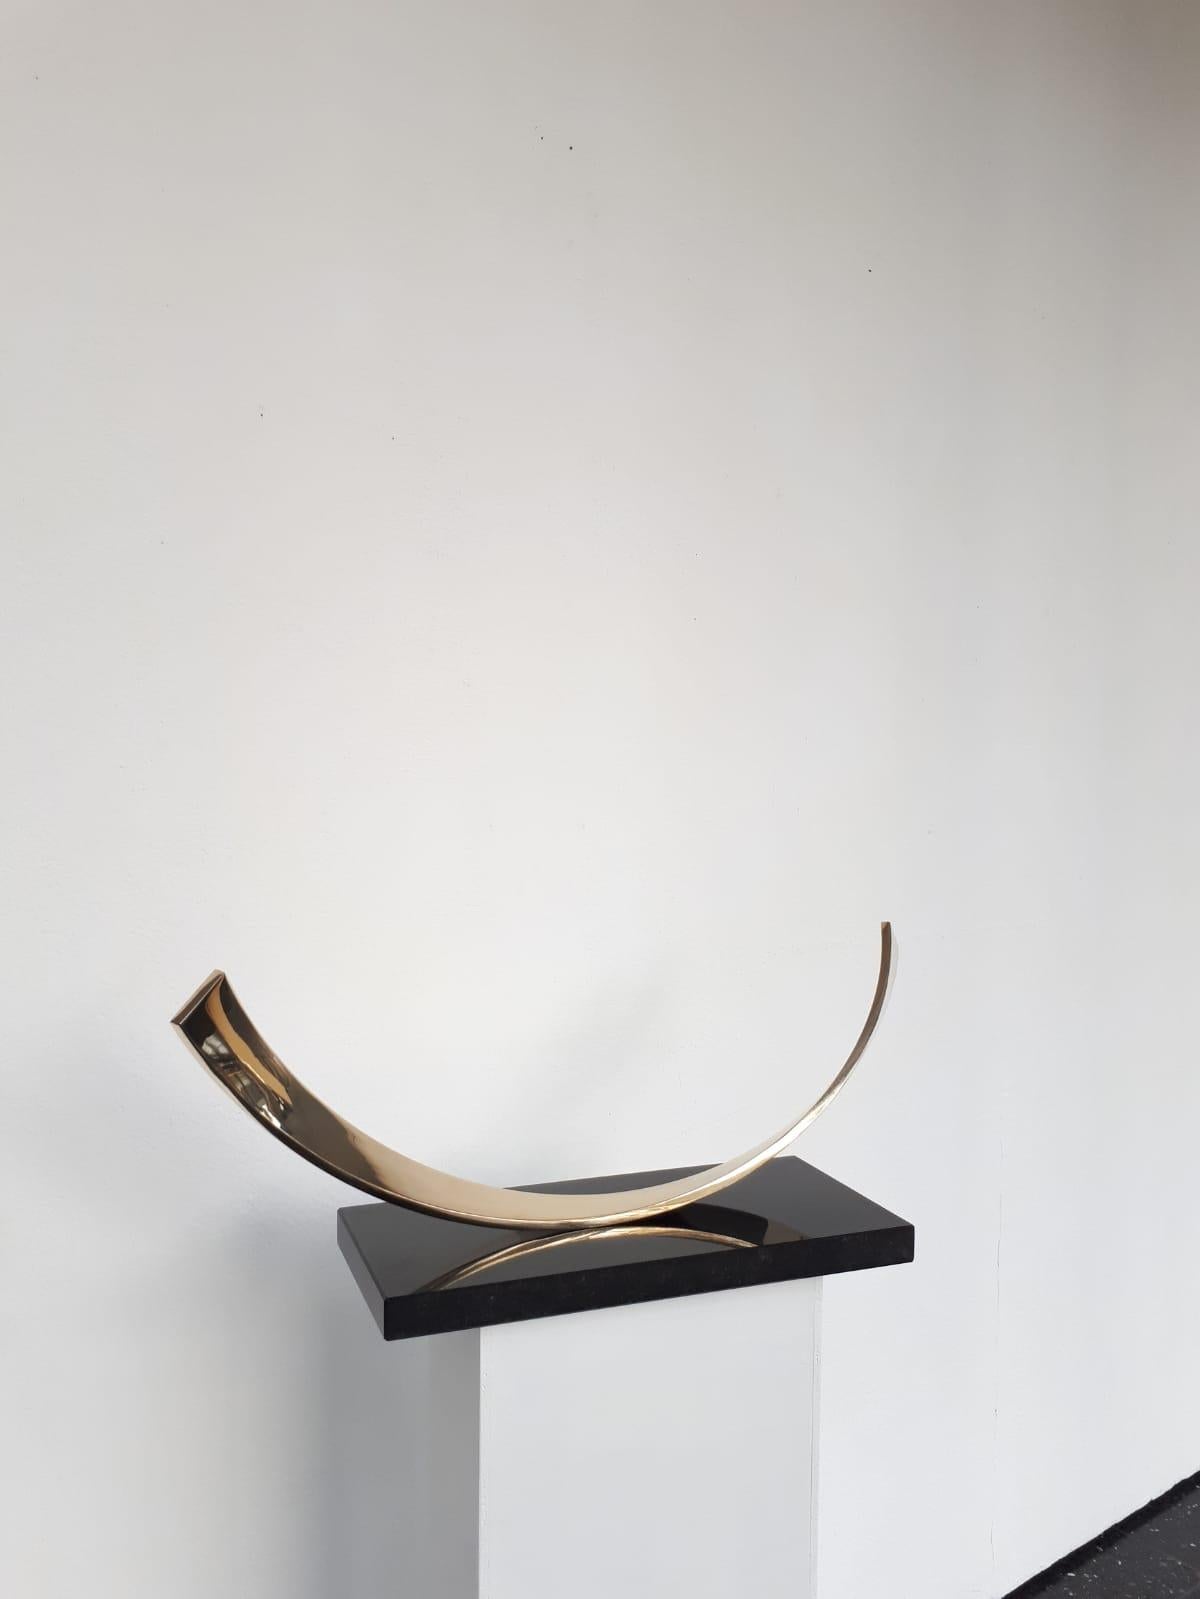 Artist: Kuno Vollet

Title: Moving Balance

Materials: Polished Bronze on black granite base

This sculpture moves back and forth like a swing once activated it moves for around 5 minutes. Please get in touch for a short movie to see the effortless